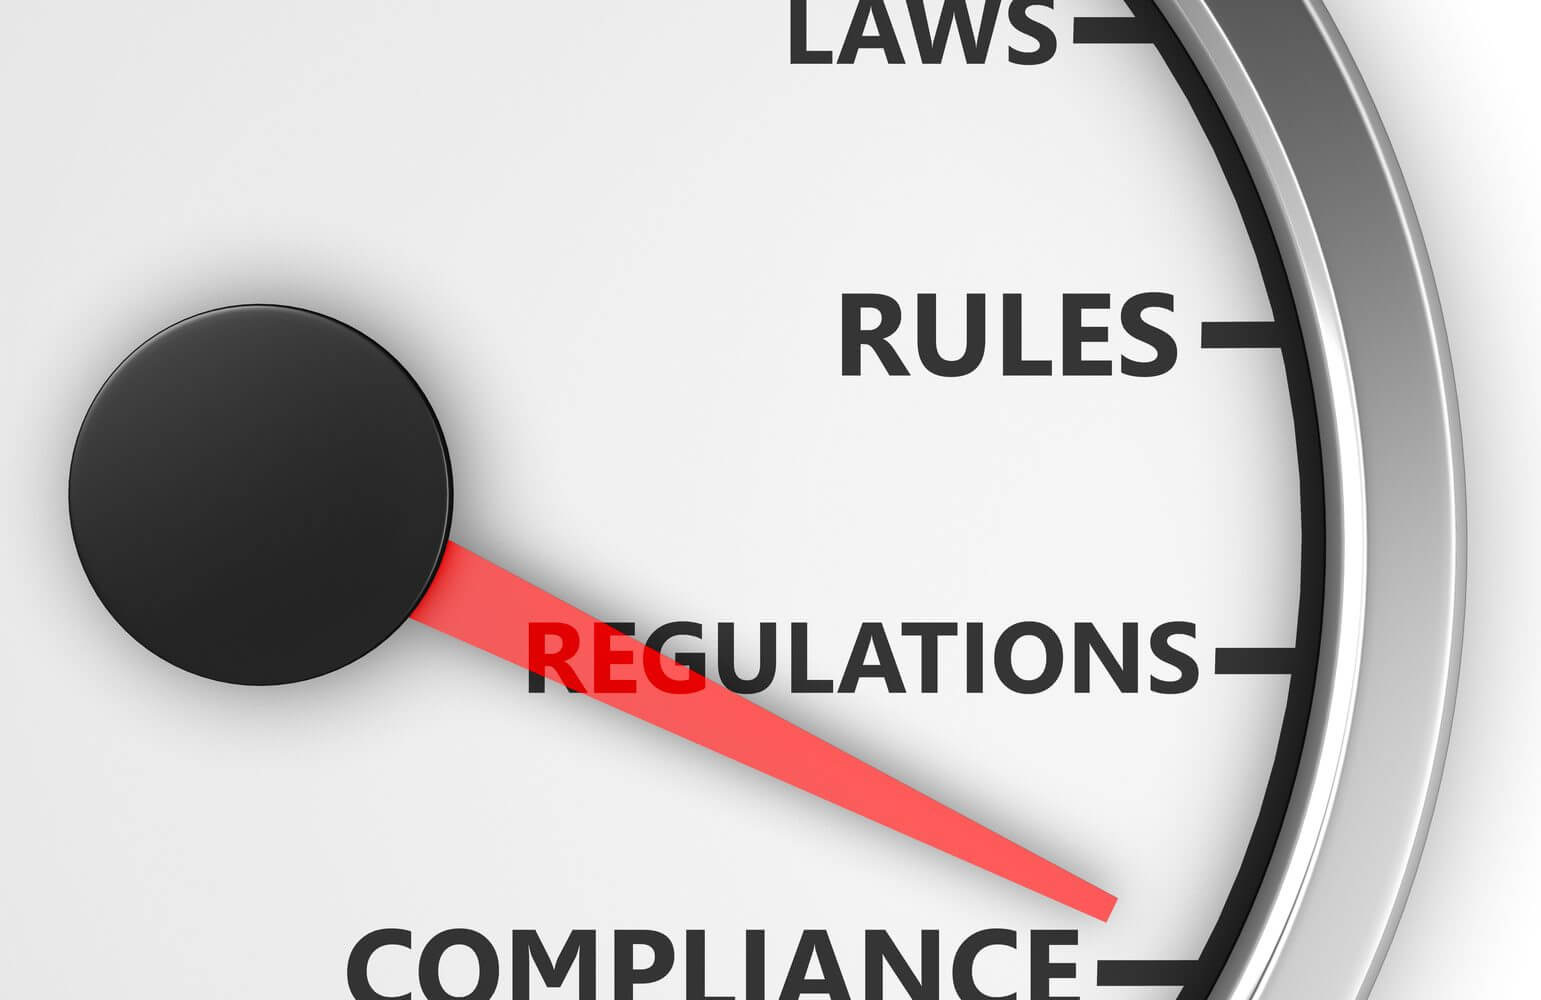 Compliance Rules Laws Regulations